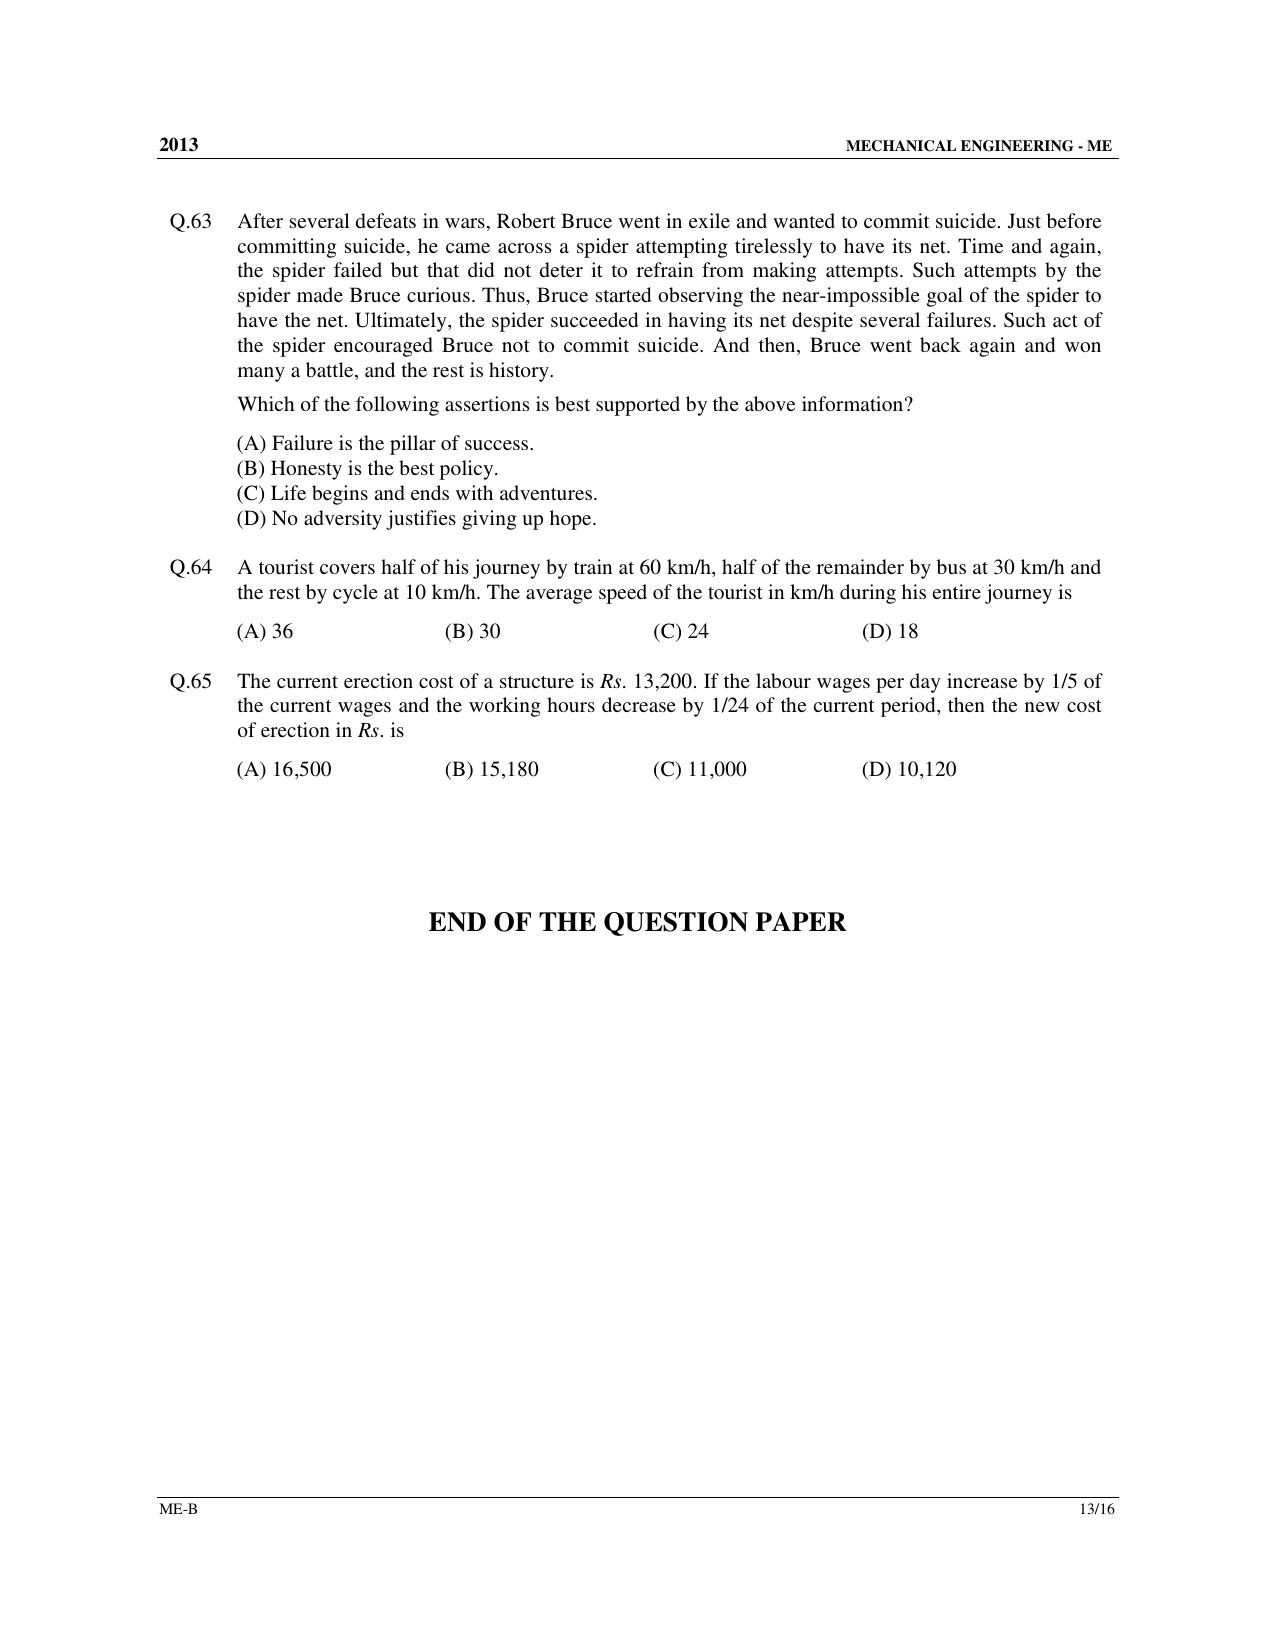 GATE 2013 Mechanical Engineering (ME) Question Paper with Answer Key - Page 28